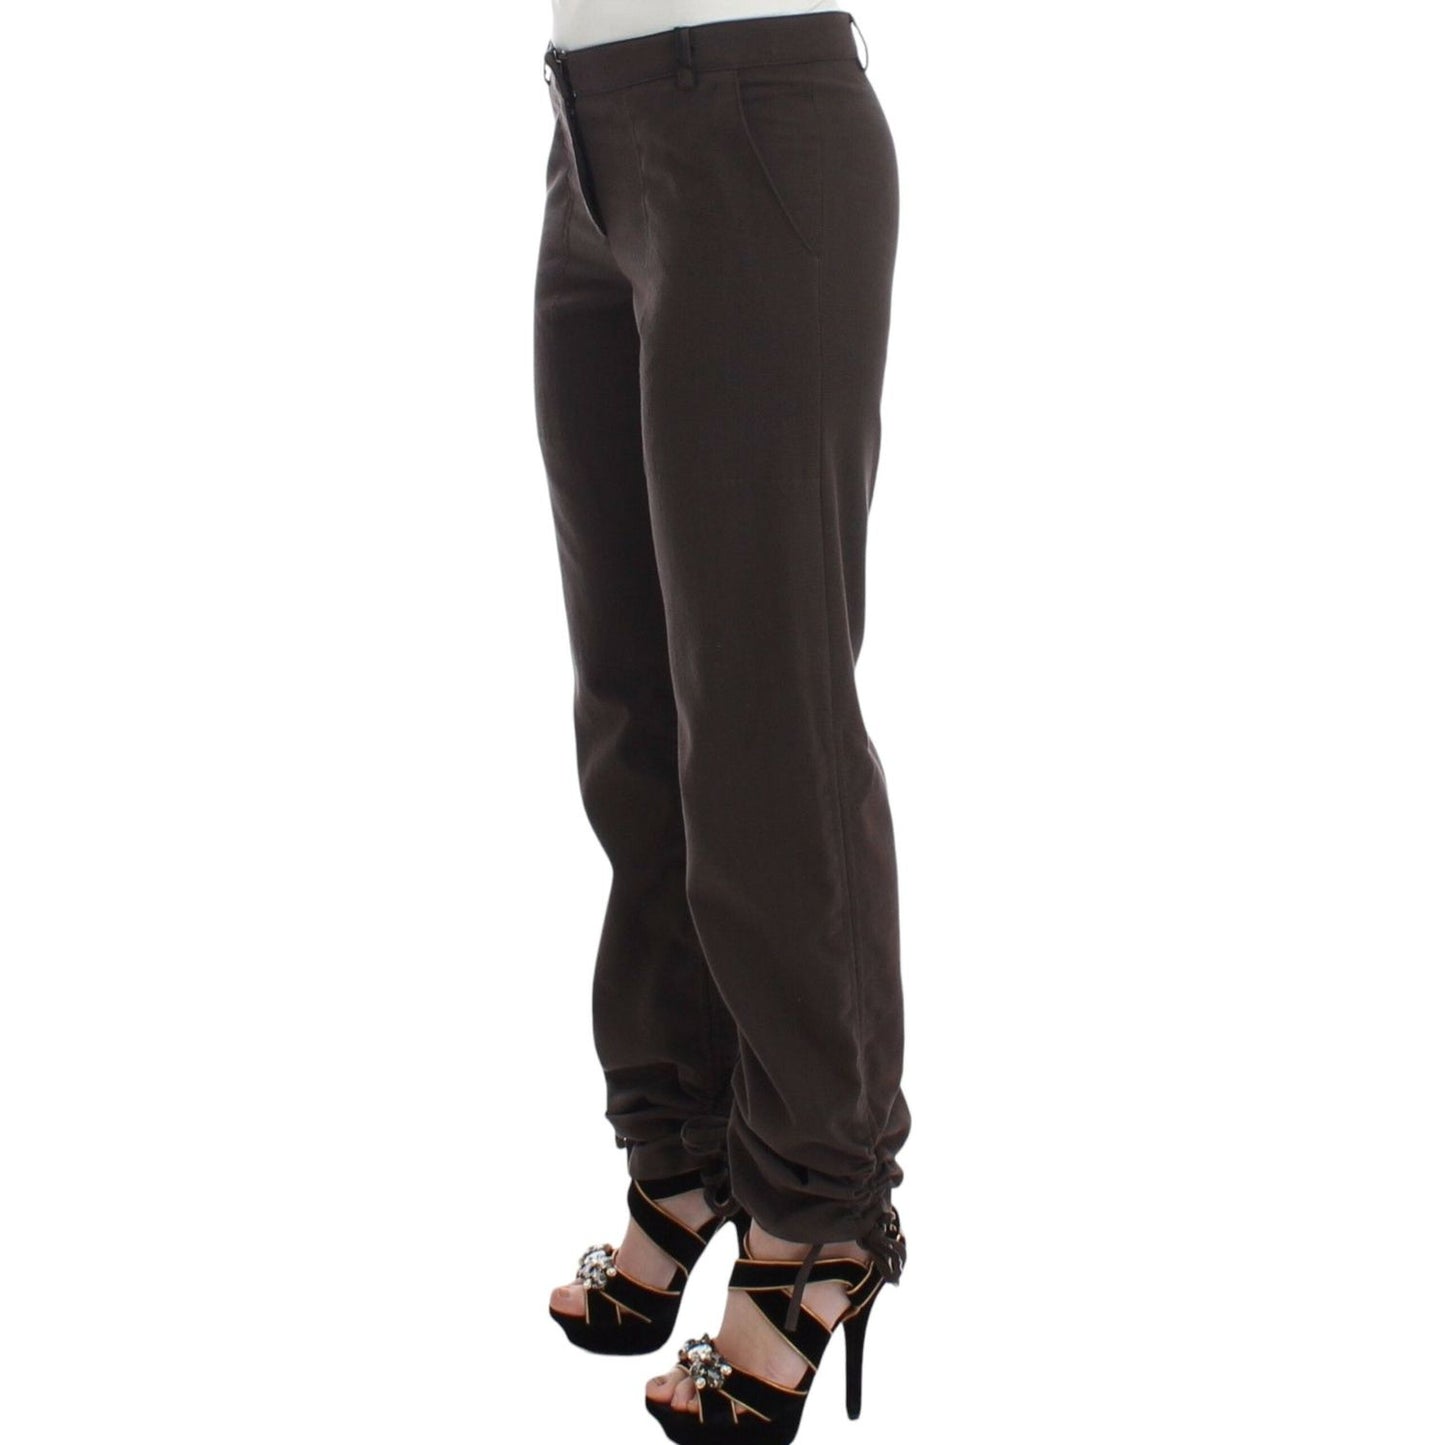 Ermanno Scervino Chic Brown Cotton Dress Pants brown-chinos-casual-dress-pants-khakis